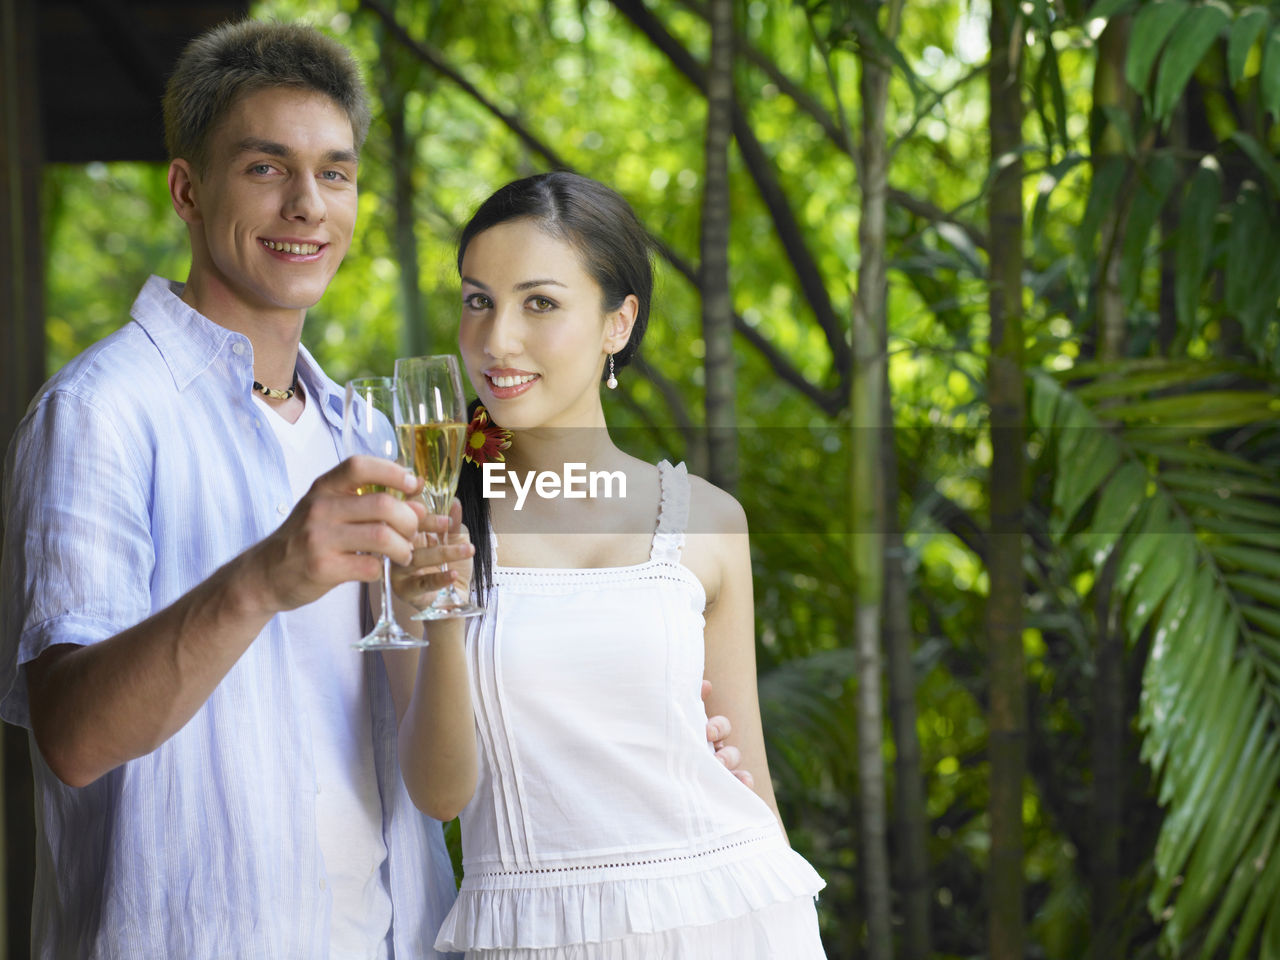 Portrait of smiling young couple with drink standing against plants